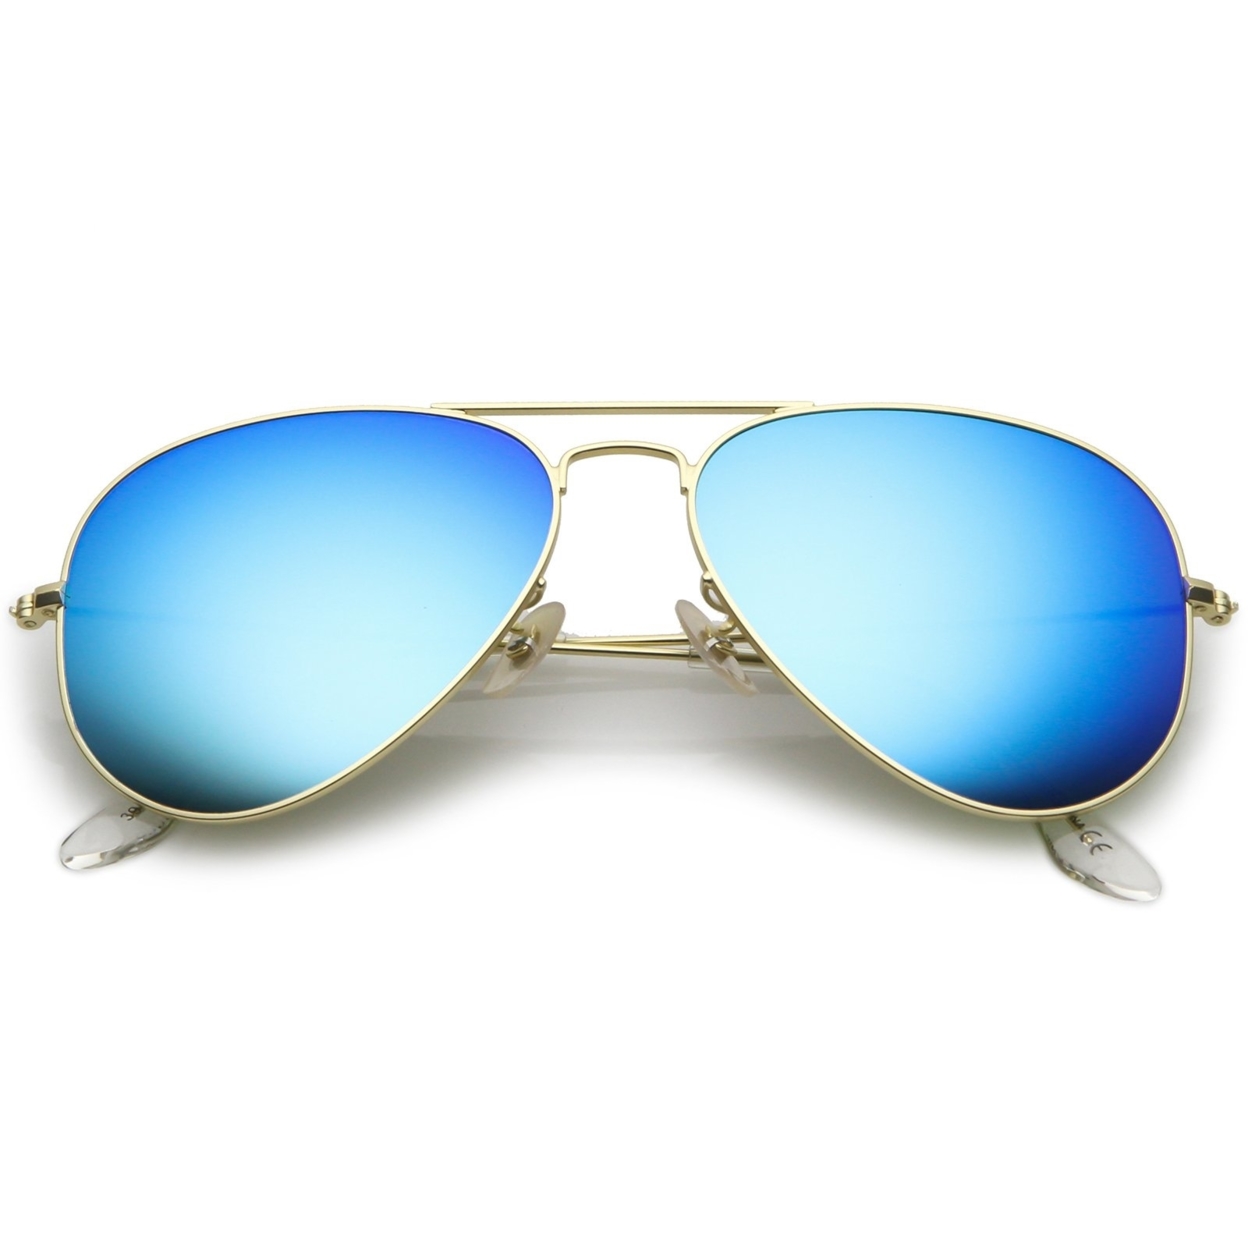 Premium Small Classic Matte Metal Aviator Sunglasses With Colored Mirror Glass Lens 57mm - Gold / Pink Mirror